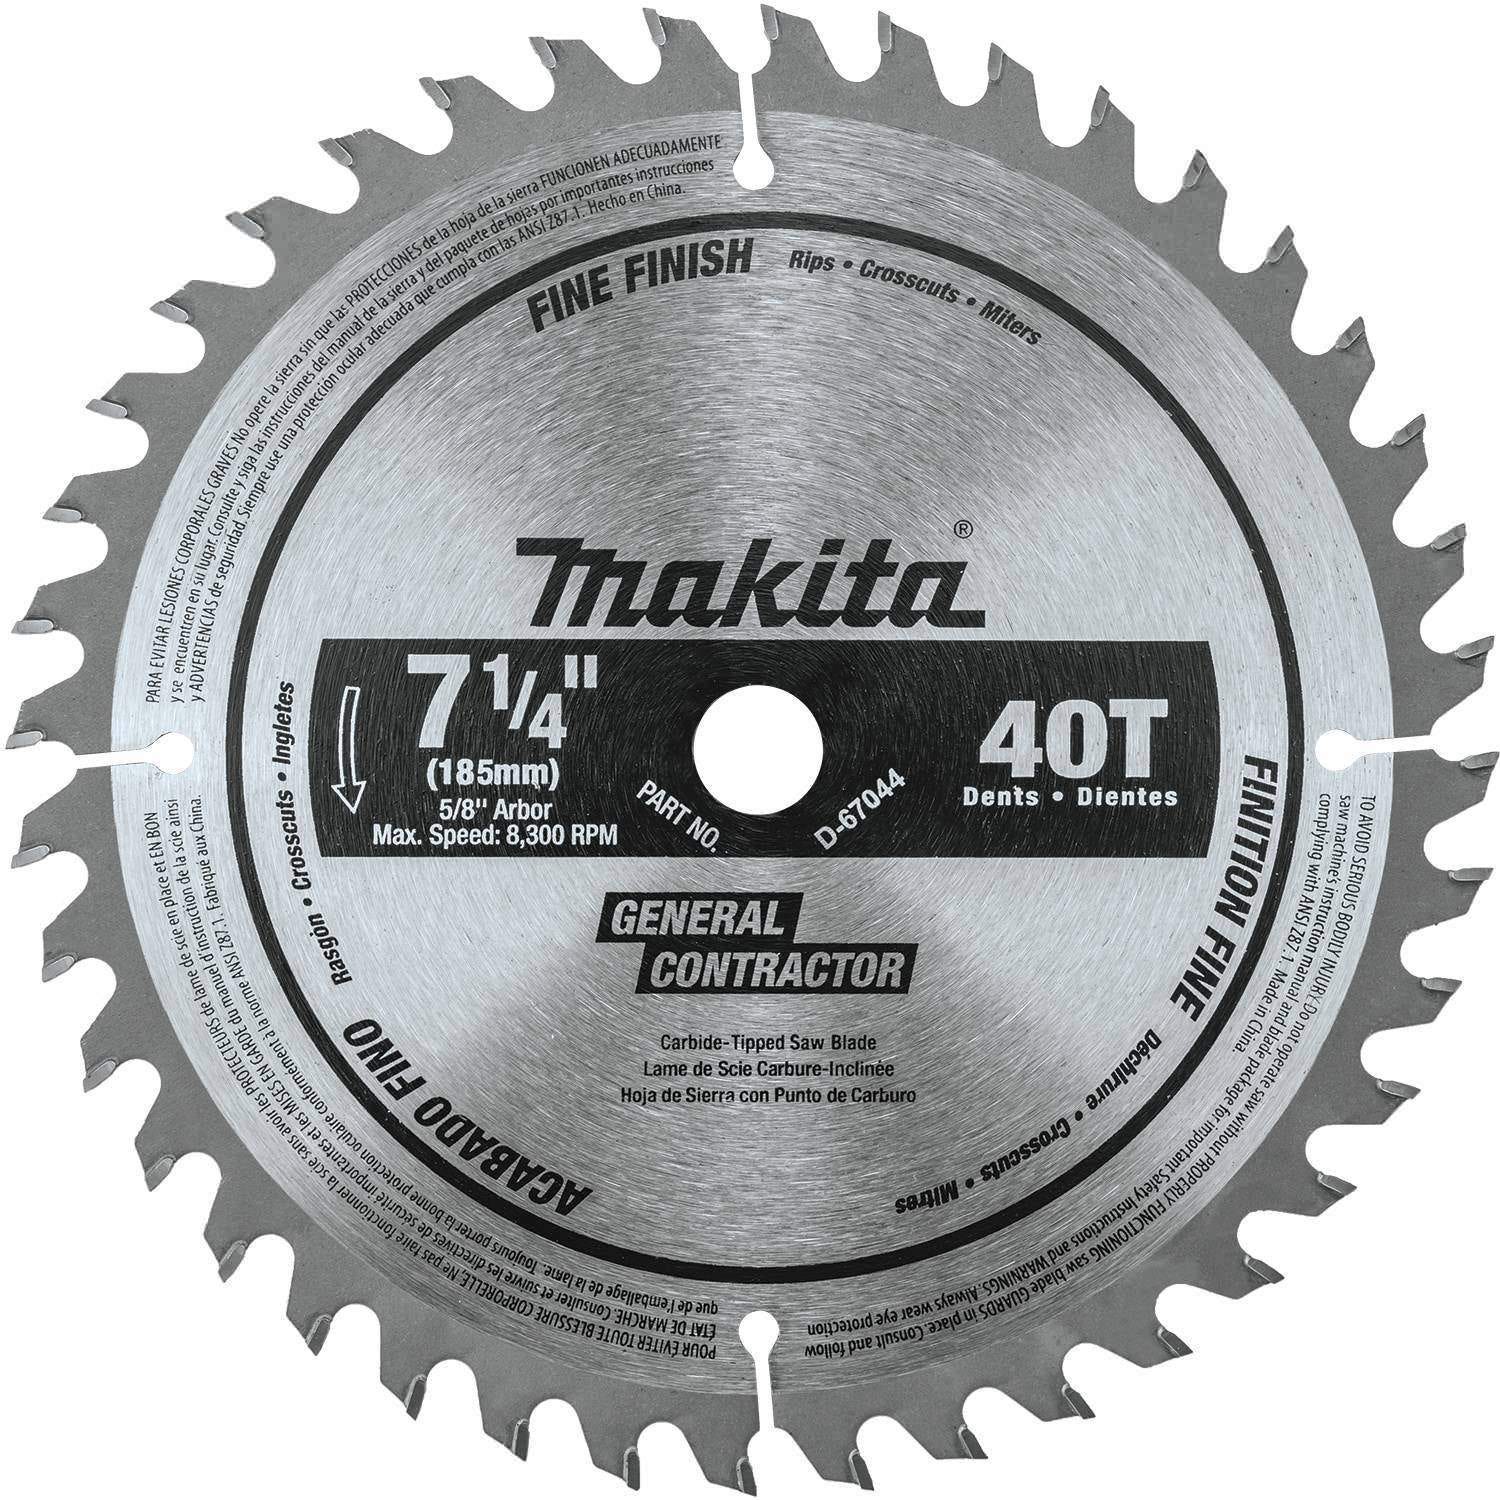 Makita Saw Blade Circular 16-5/16 in 32 Teeth Carbide Tipped Wood Cutting Blades for sale online 